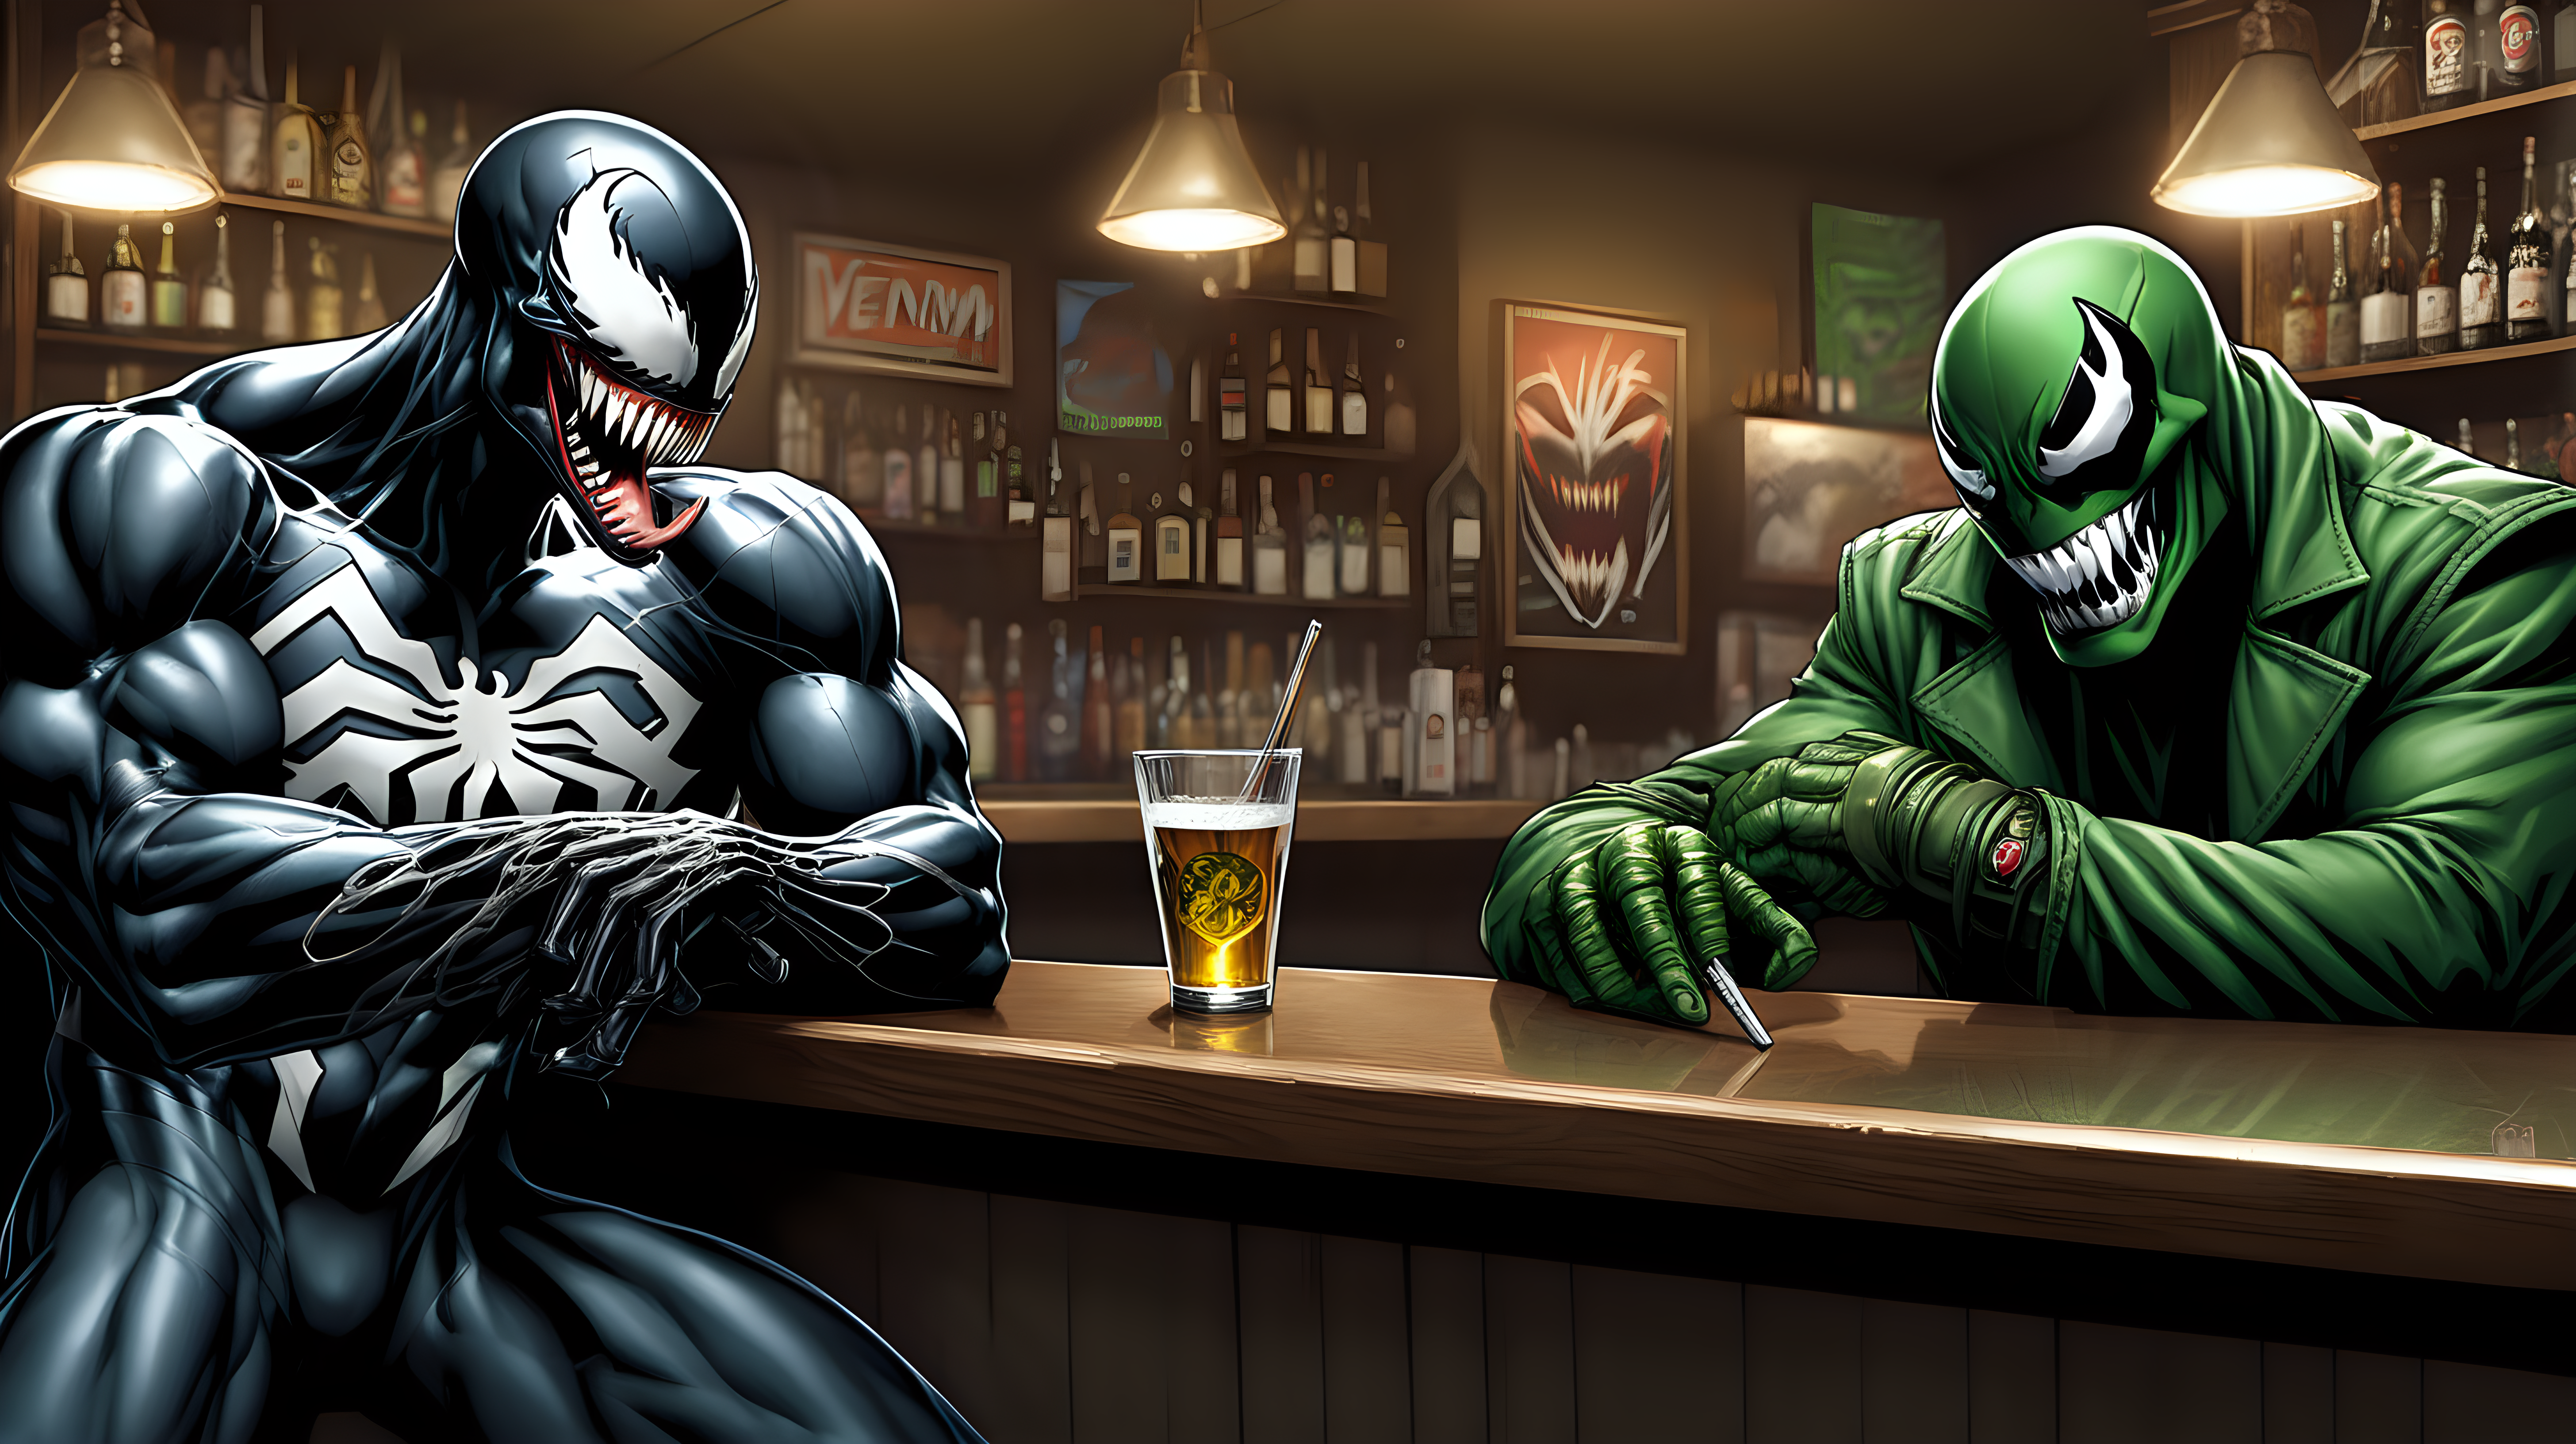 Venom a joint at a bar with Dr